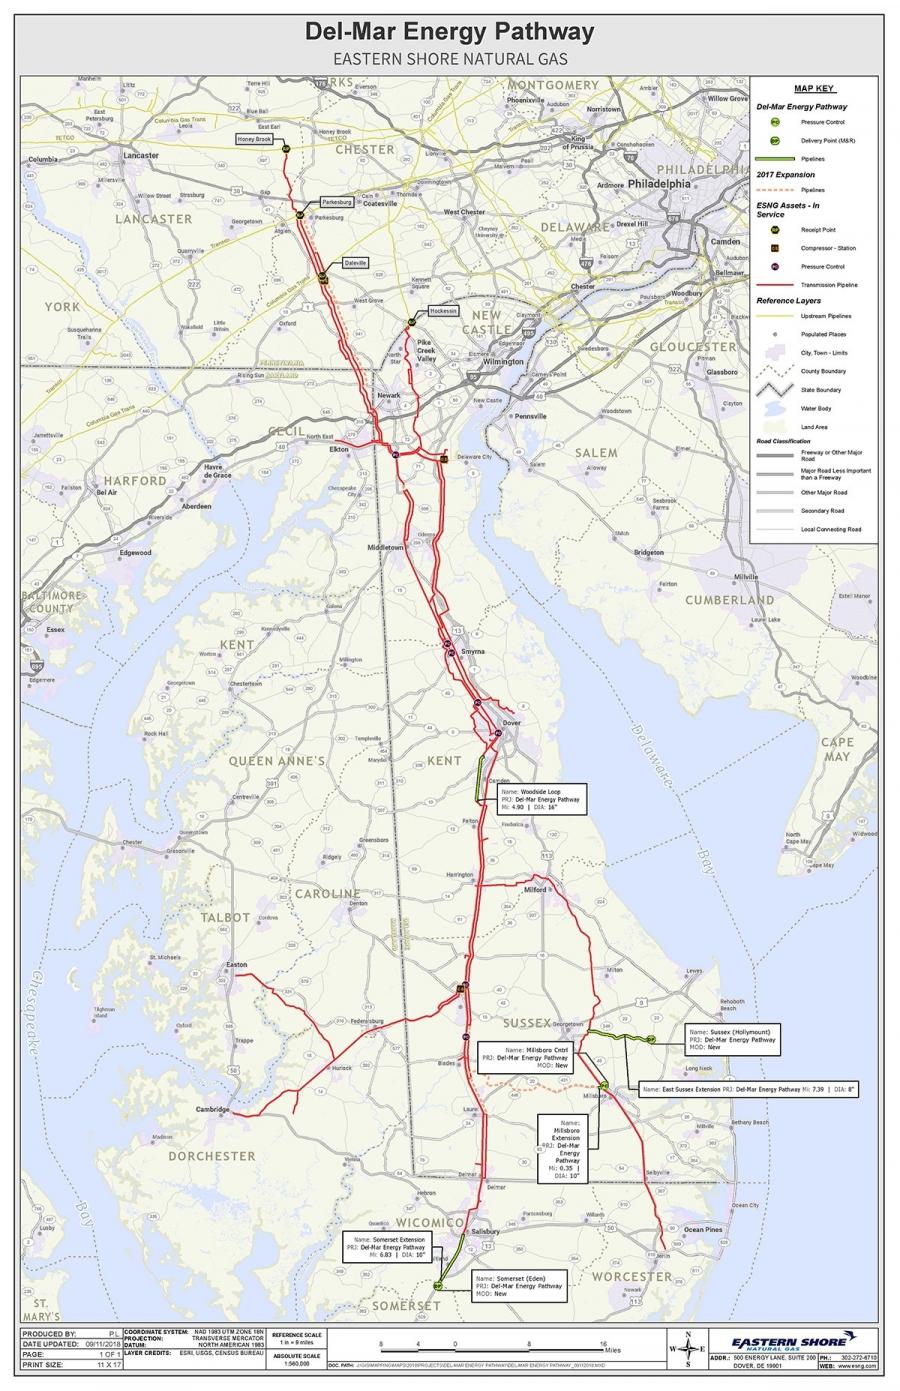 The construction and operation of the new natural gas pipeline and related facilities will provide approximately 11.8 million cu. ft. per day of additional natural gas from transportation service and 2.5 million cu. ft. of off-peak transportation service to Chesapeake Utilities’ natural gas distribution subsidiaries on the Delmarva Peninsula and one industrial customer.